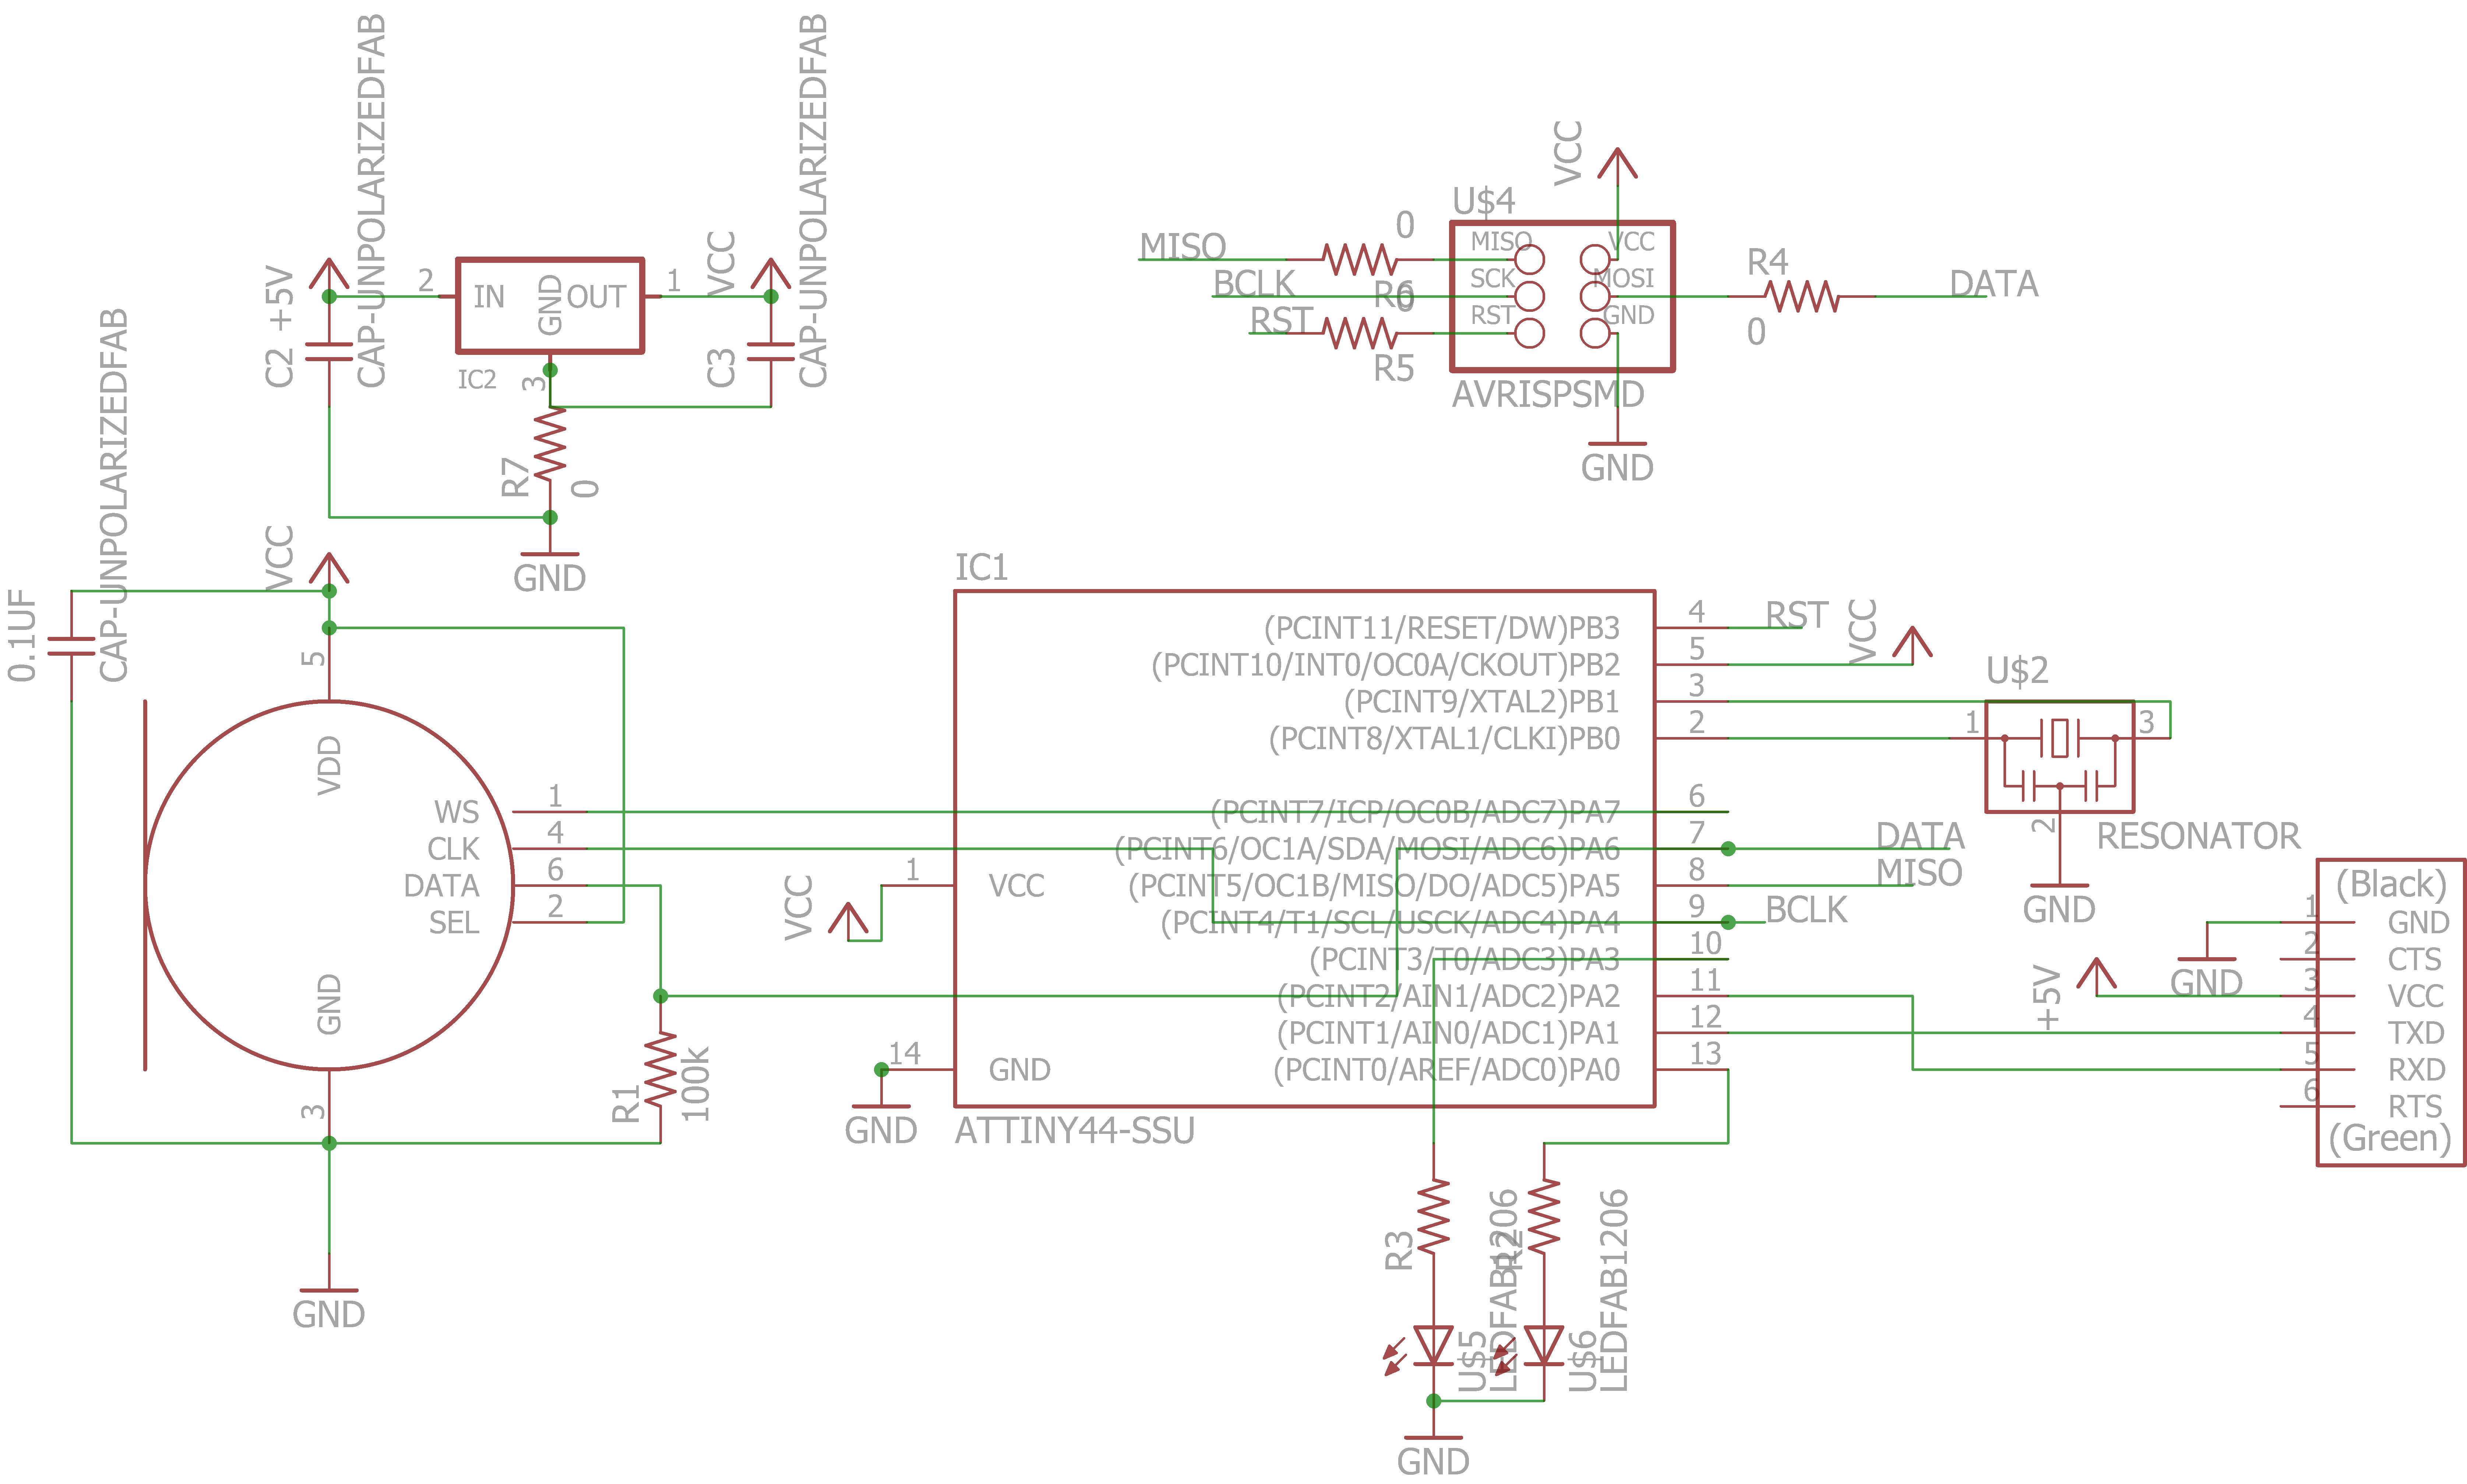 Schematic of the I2S Mic board